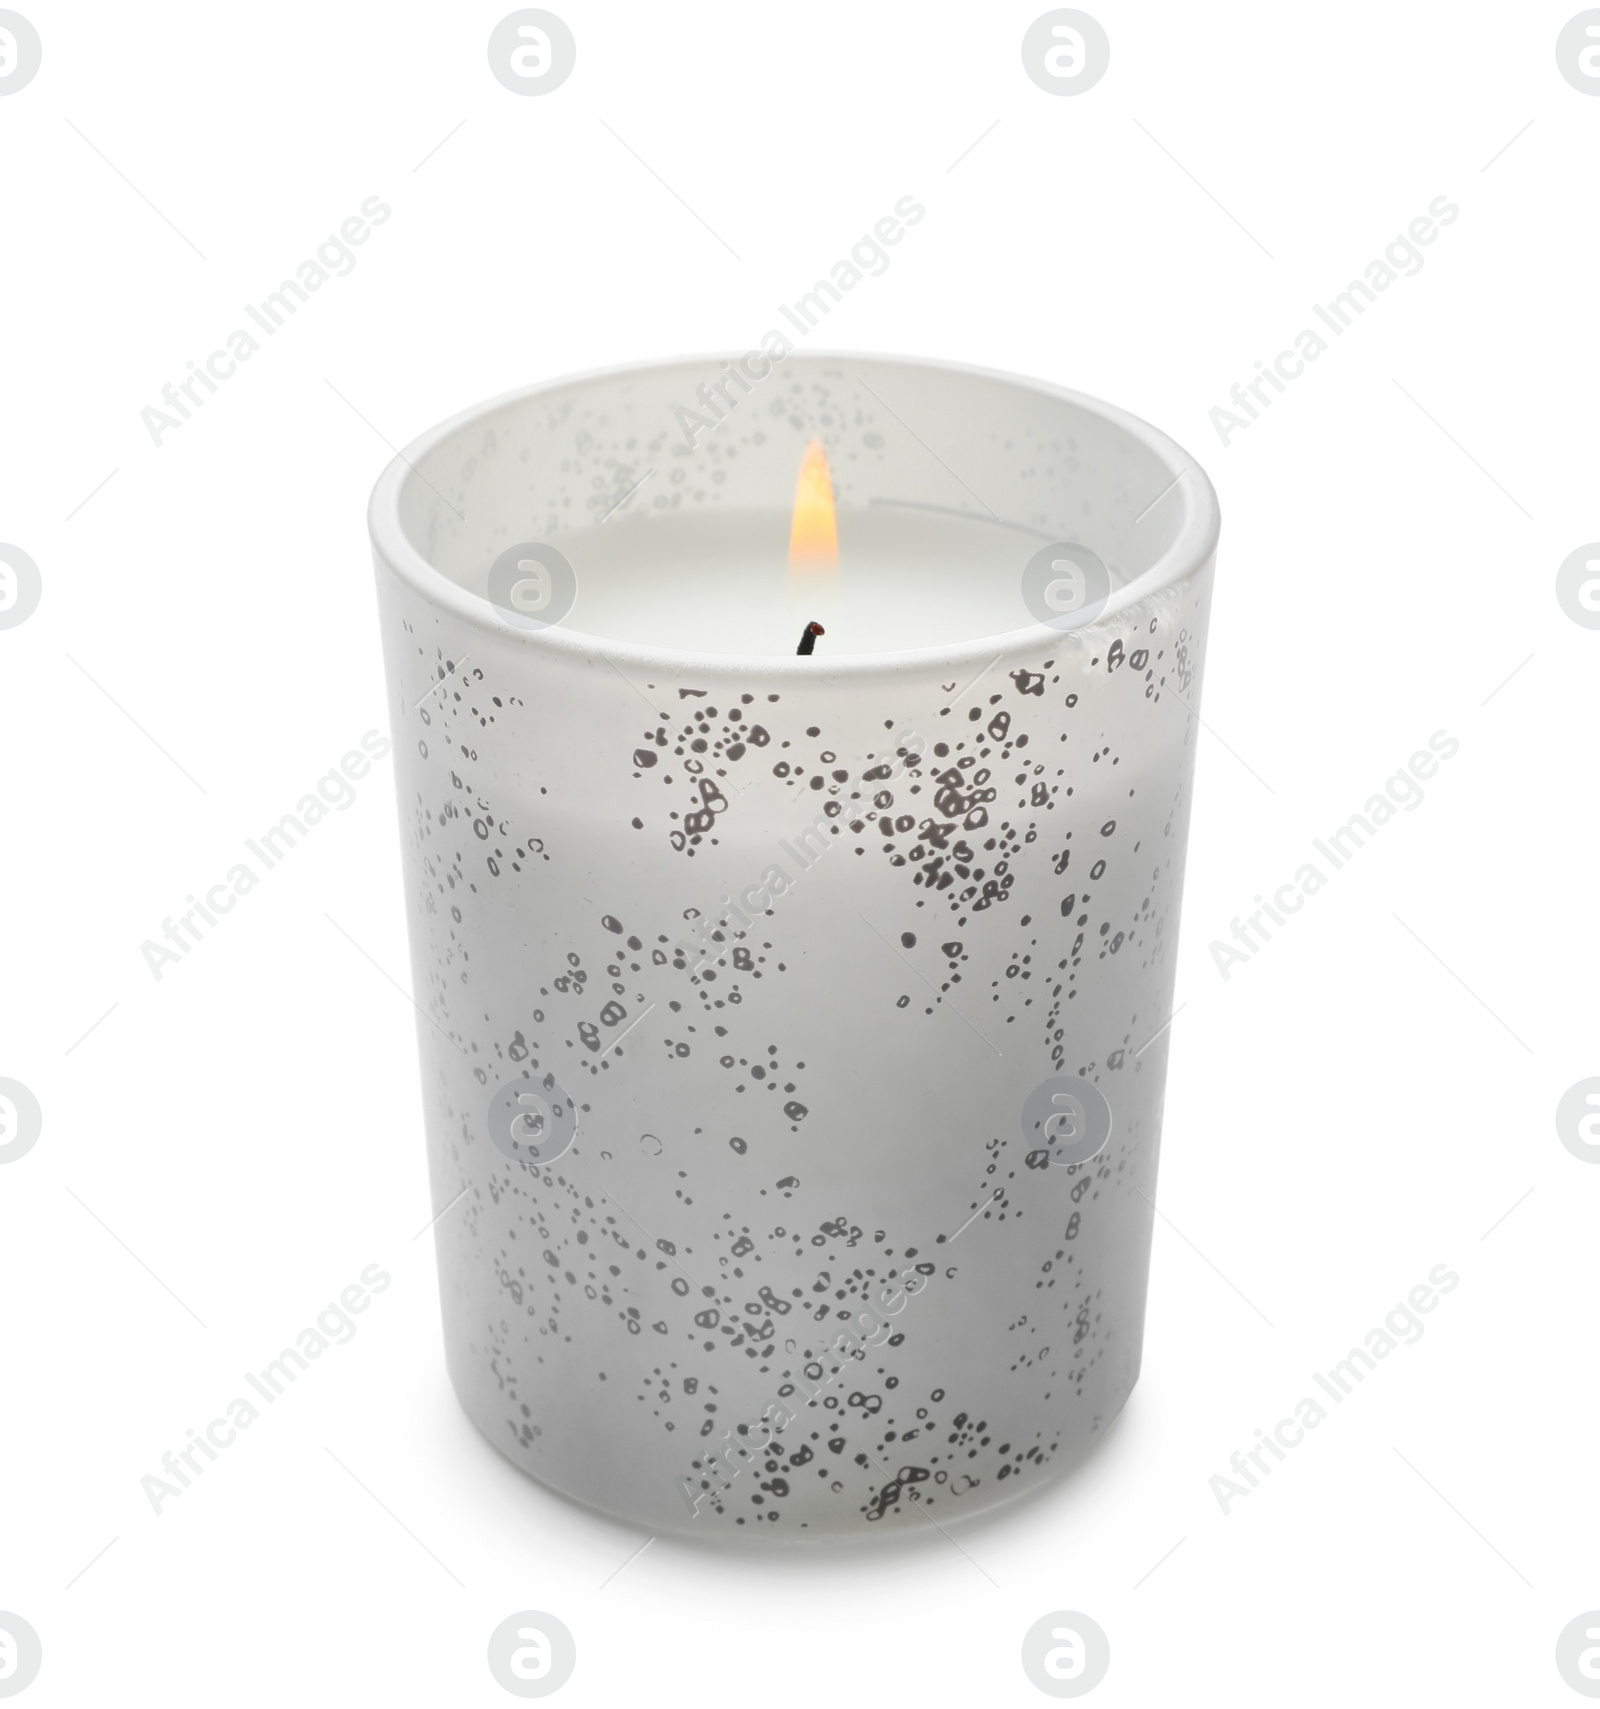 Photo of Burning wax candle in glass holder isolated on white